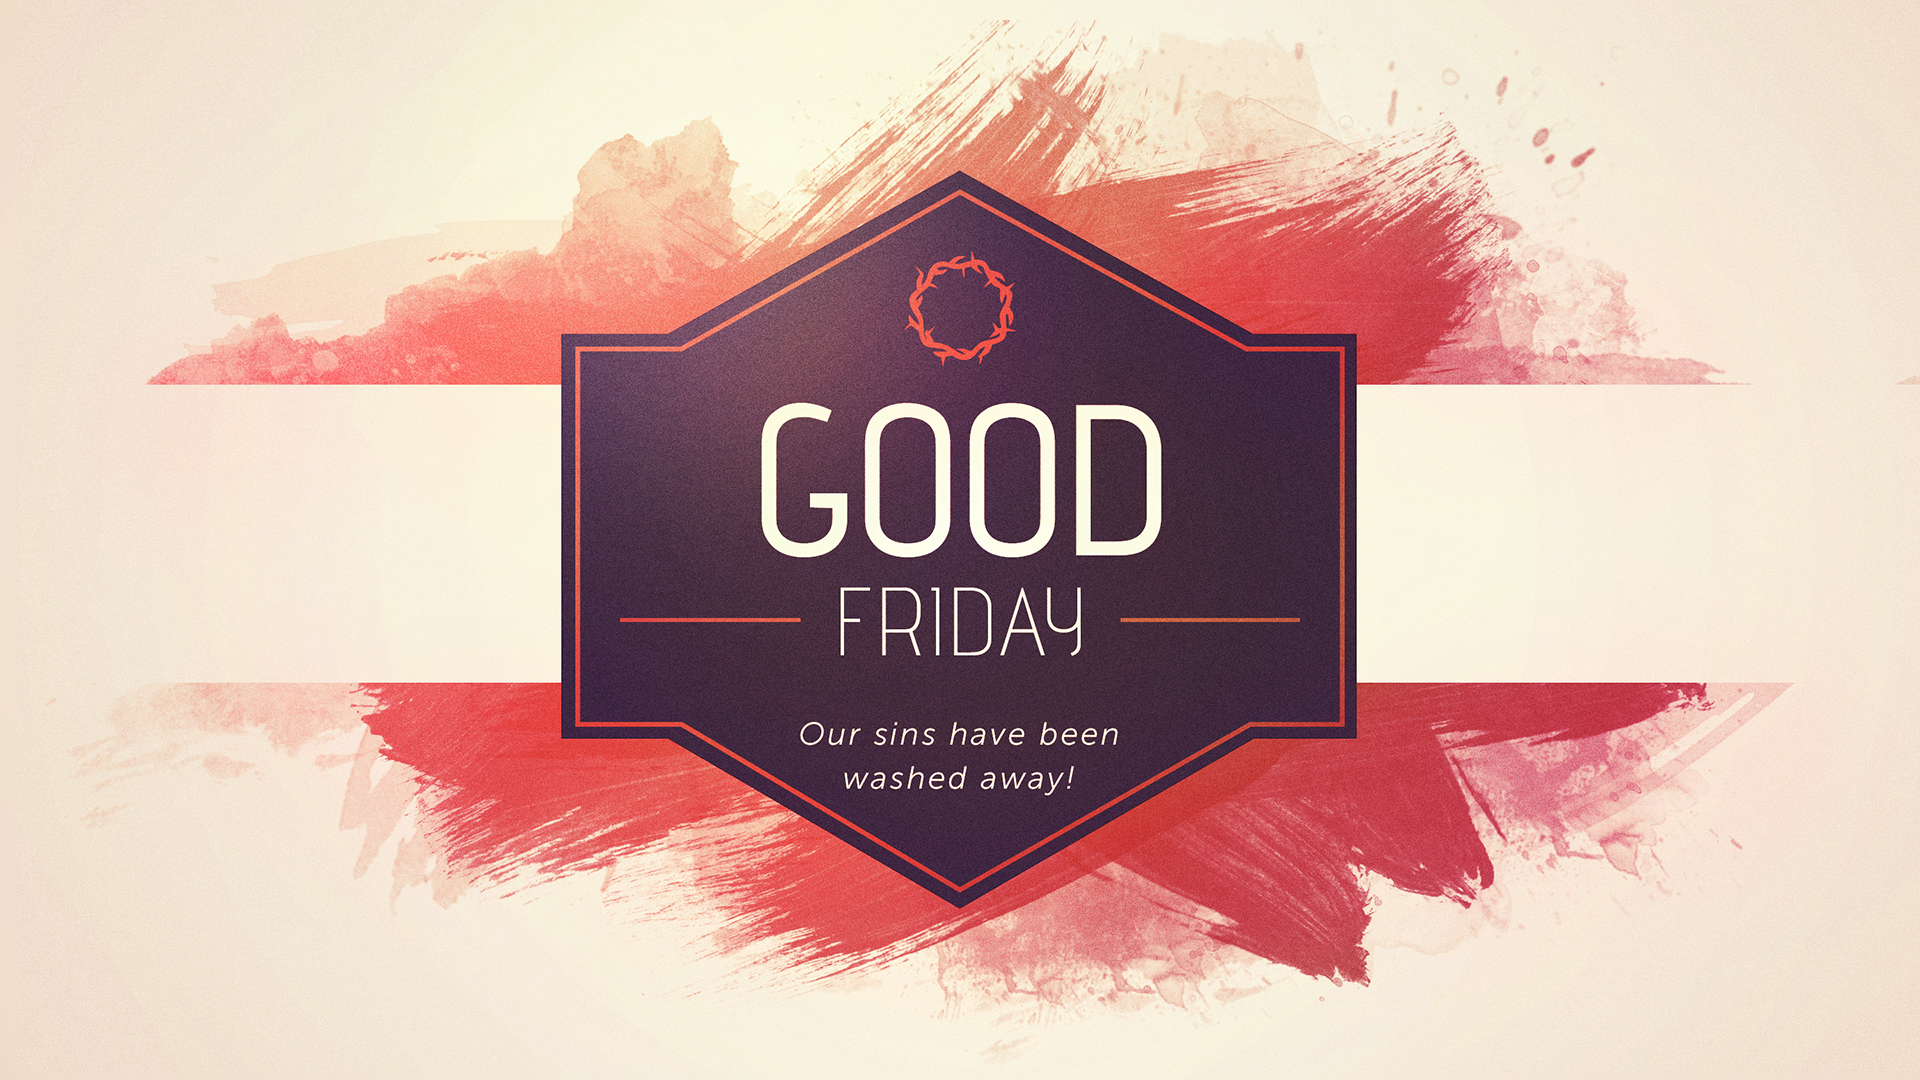 Featured image for Good Friday Service